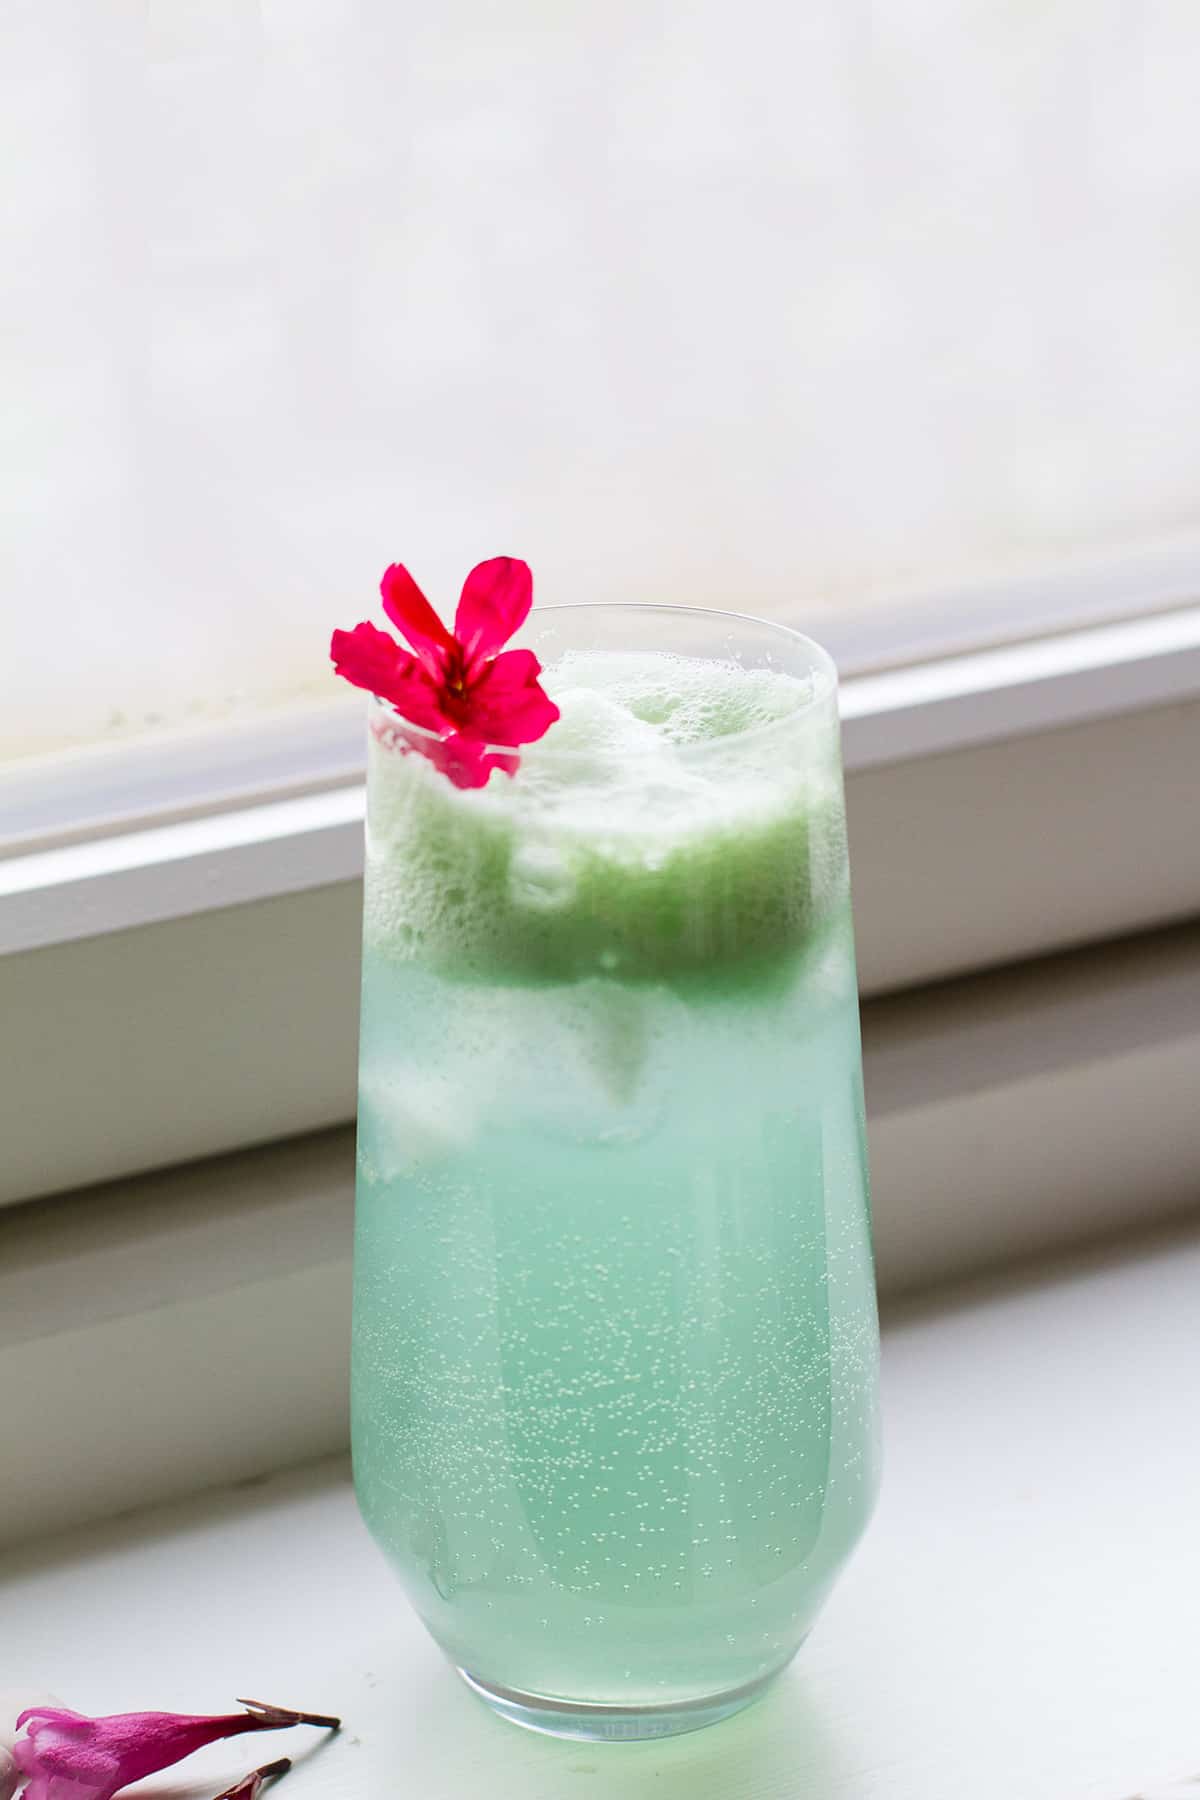 A tall glass with cucumber gin and tonic and a fresh, pink flower.